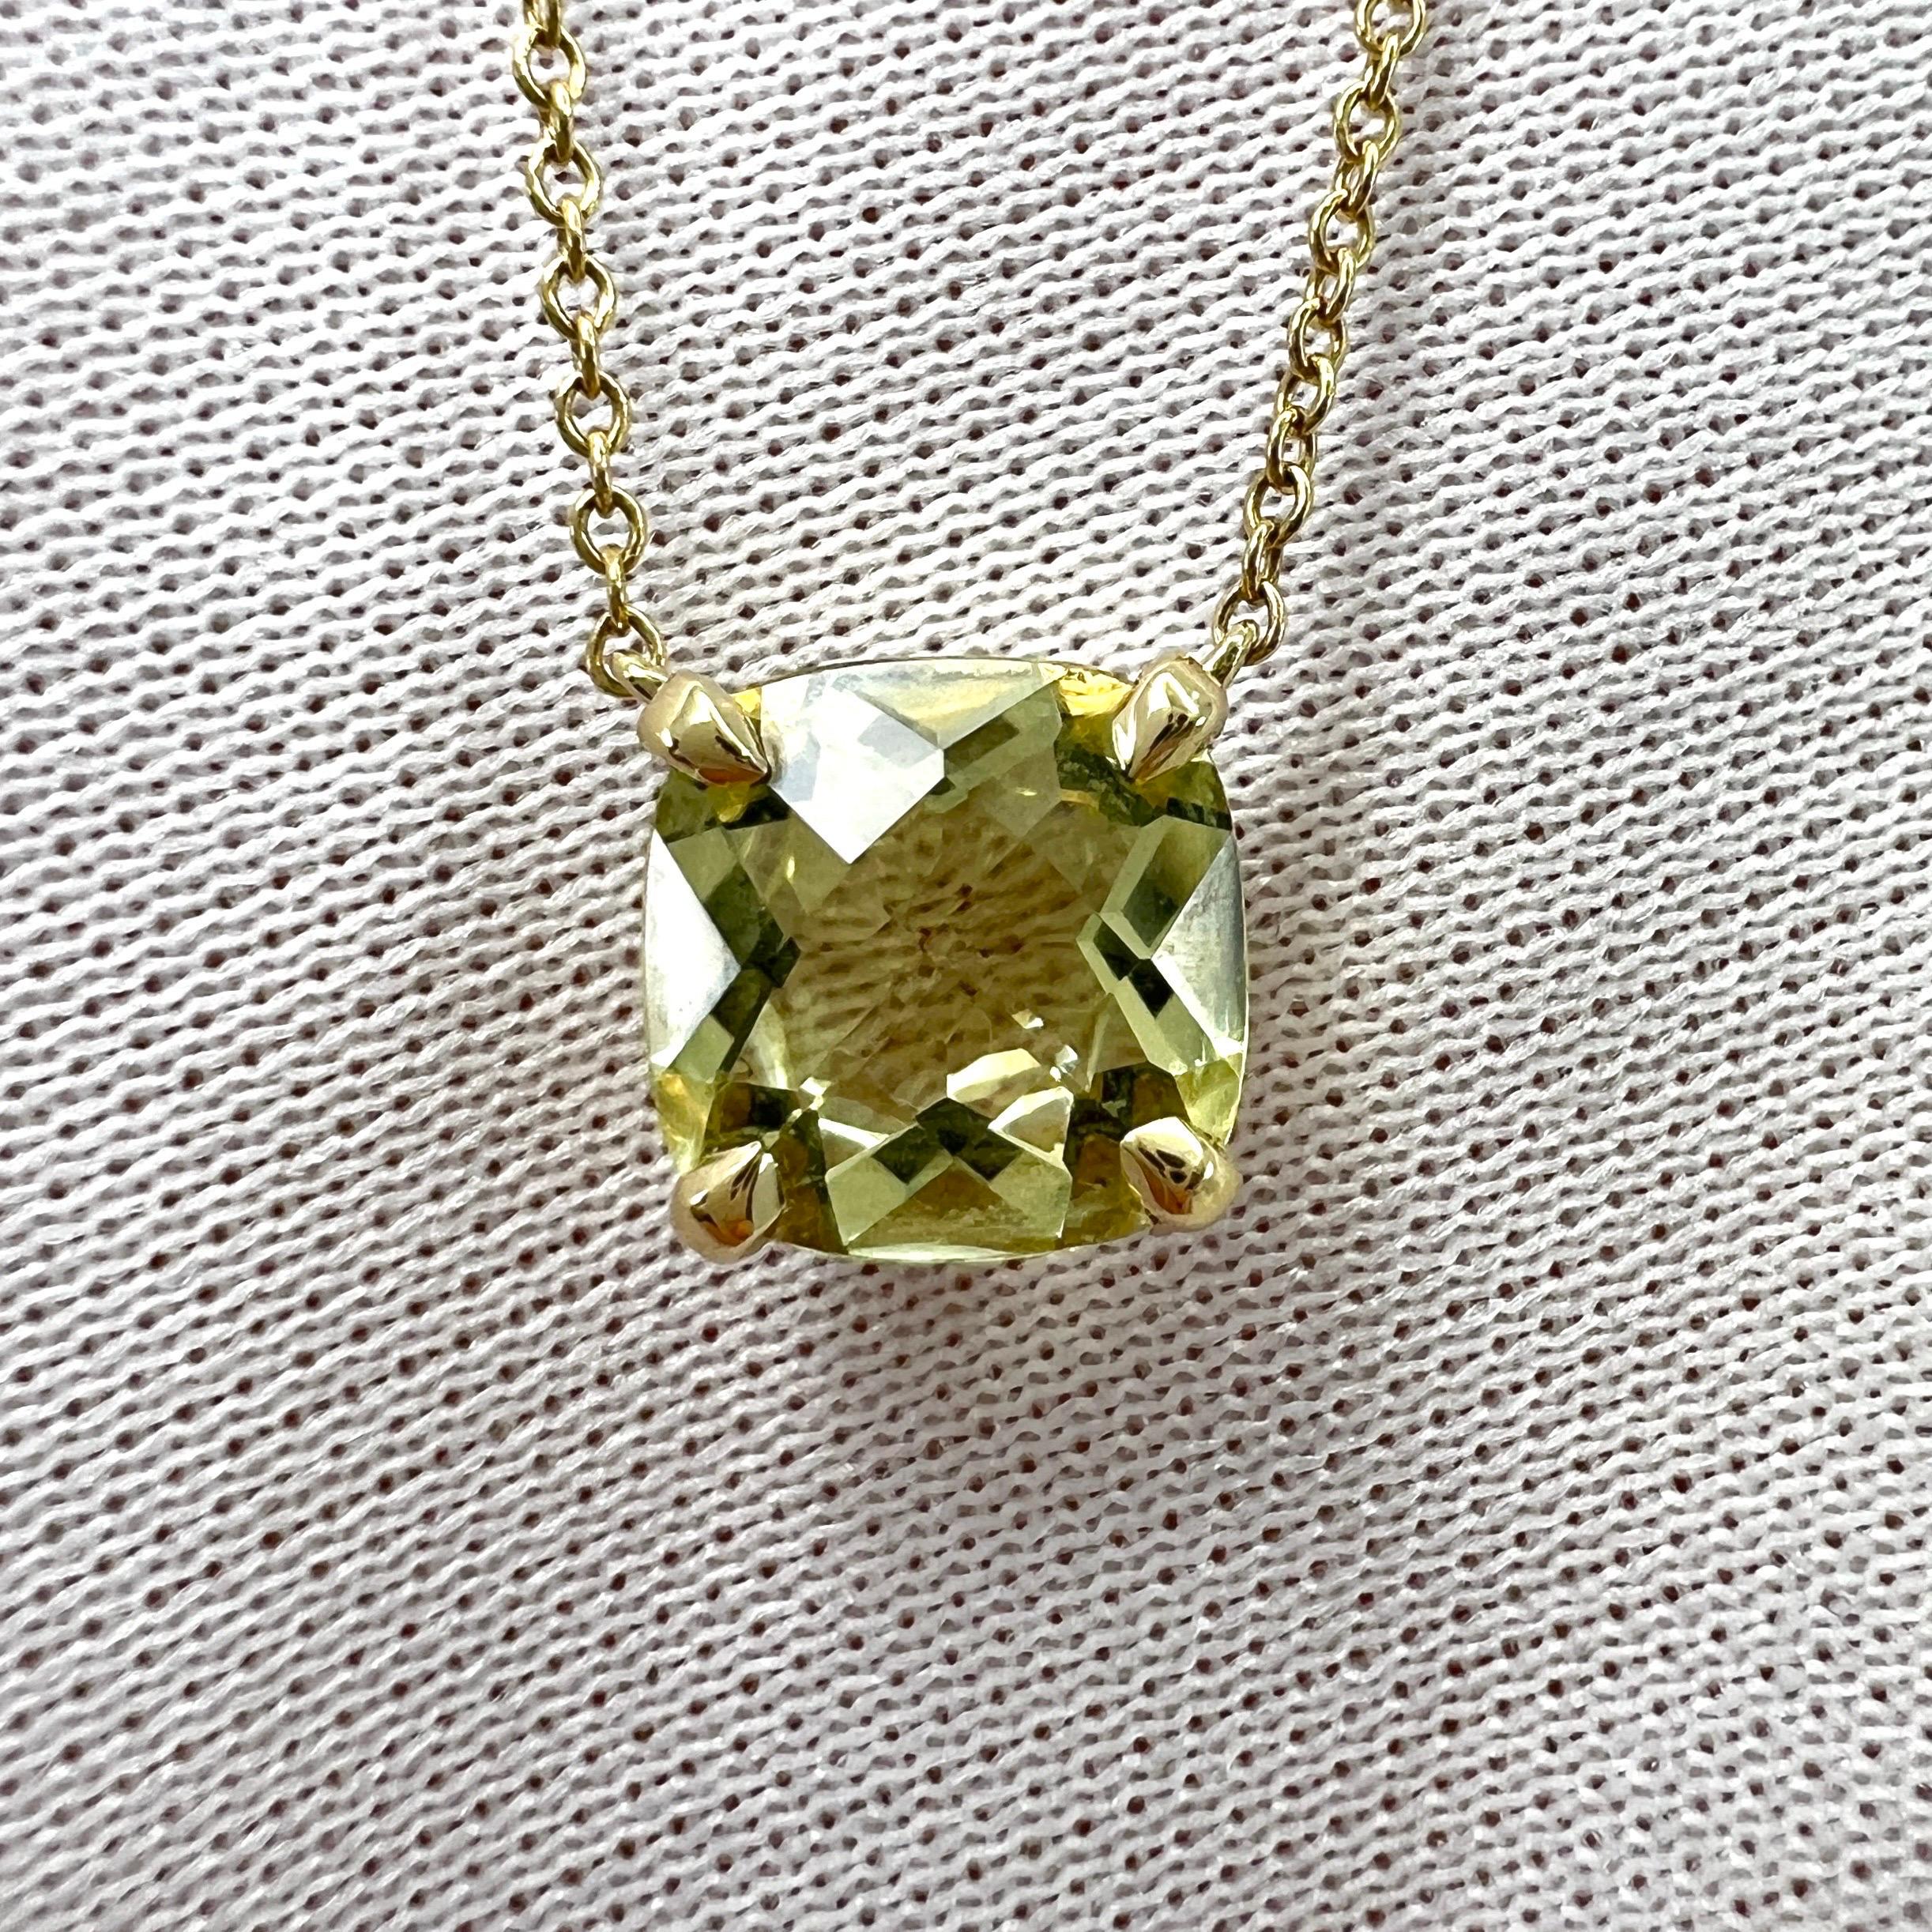 Tiffany & Co. Sparkler Yellow Citrine Lemon Quartz 18k Gold Pendant Necklace

A beautiful 18k yellow gold pendant necklace set with a stunning bright yellow citrine with an excellent square rose cut. Measuring 8mm.

Fine jewellery houses like